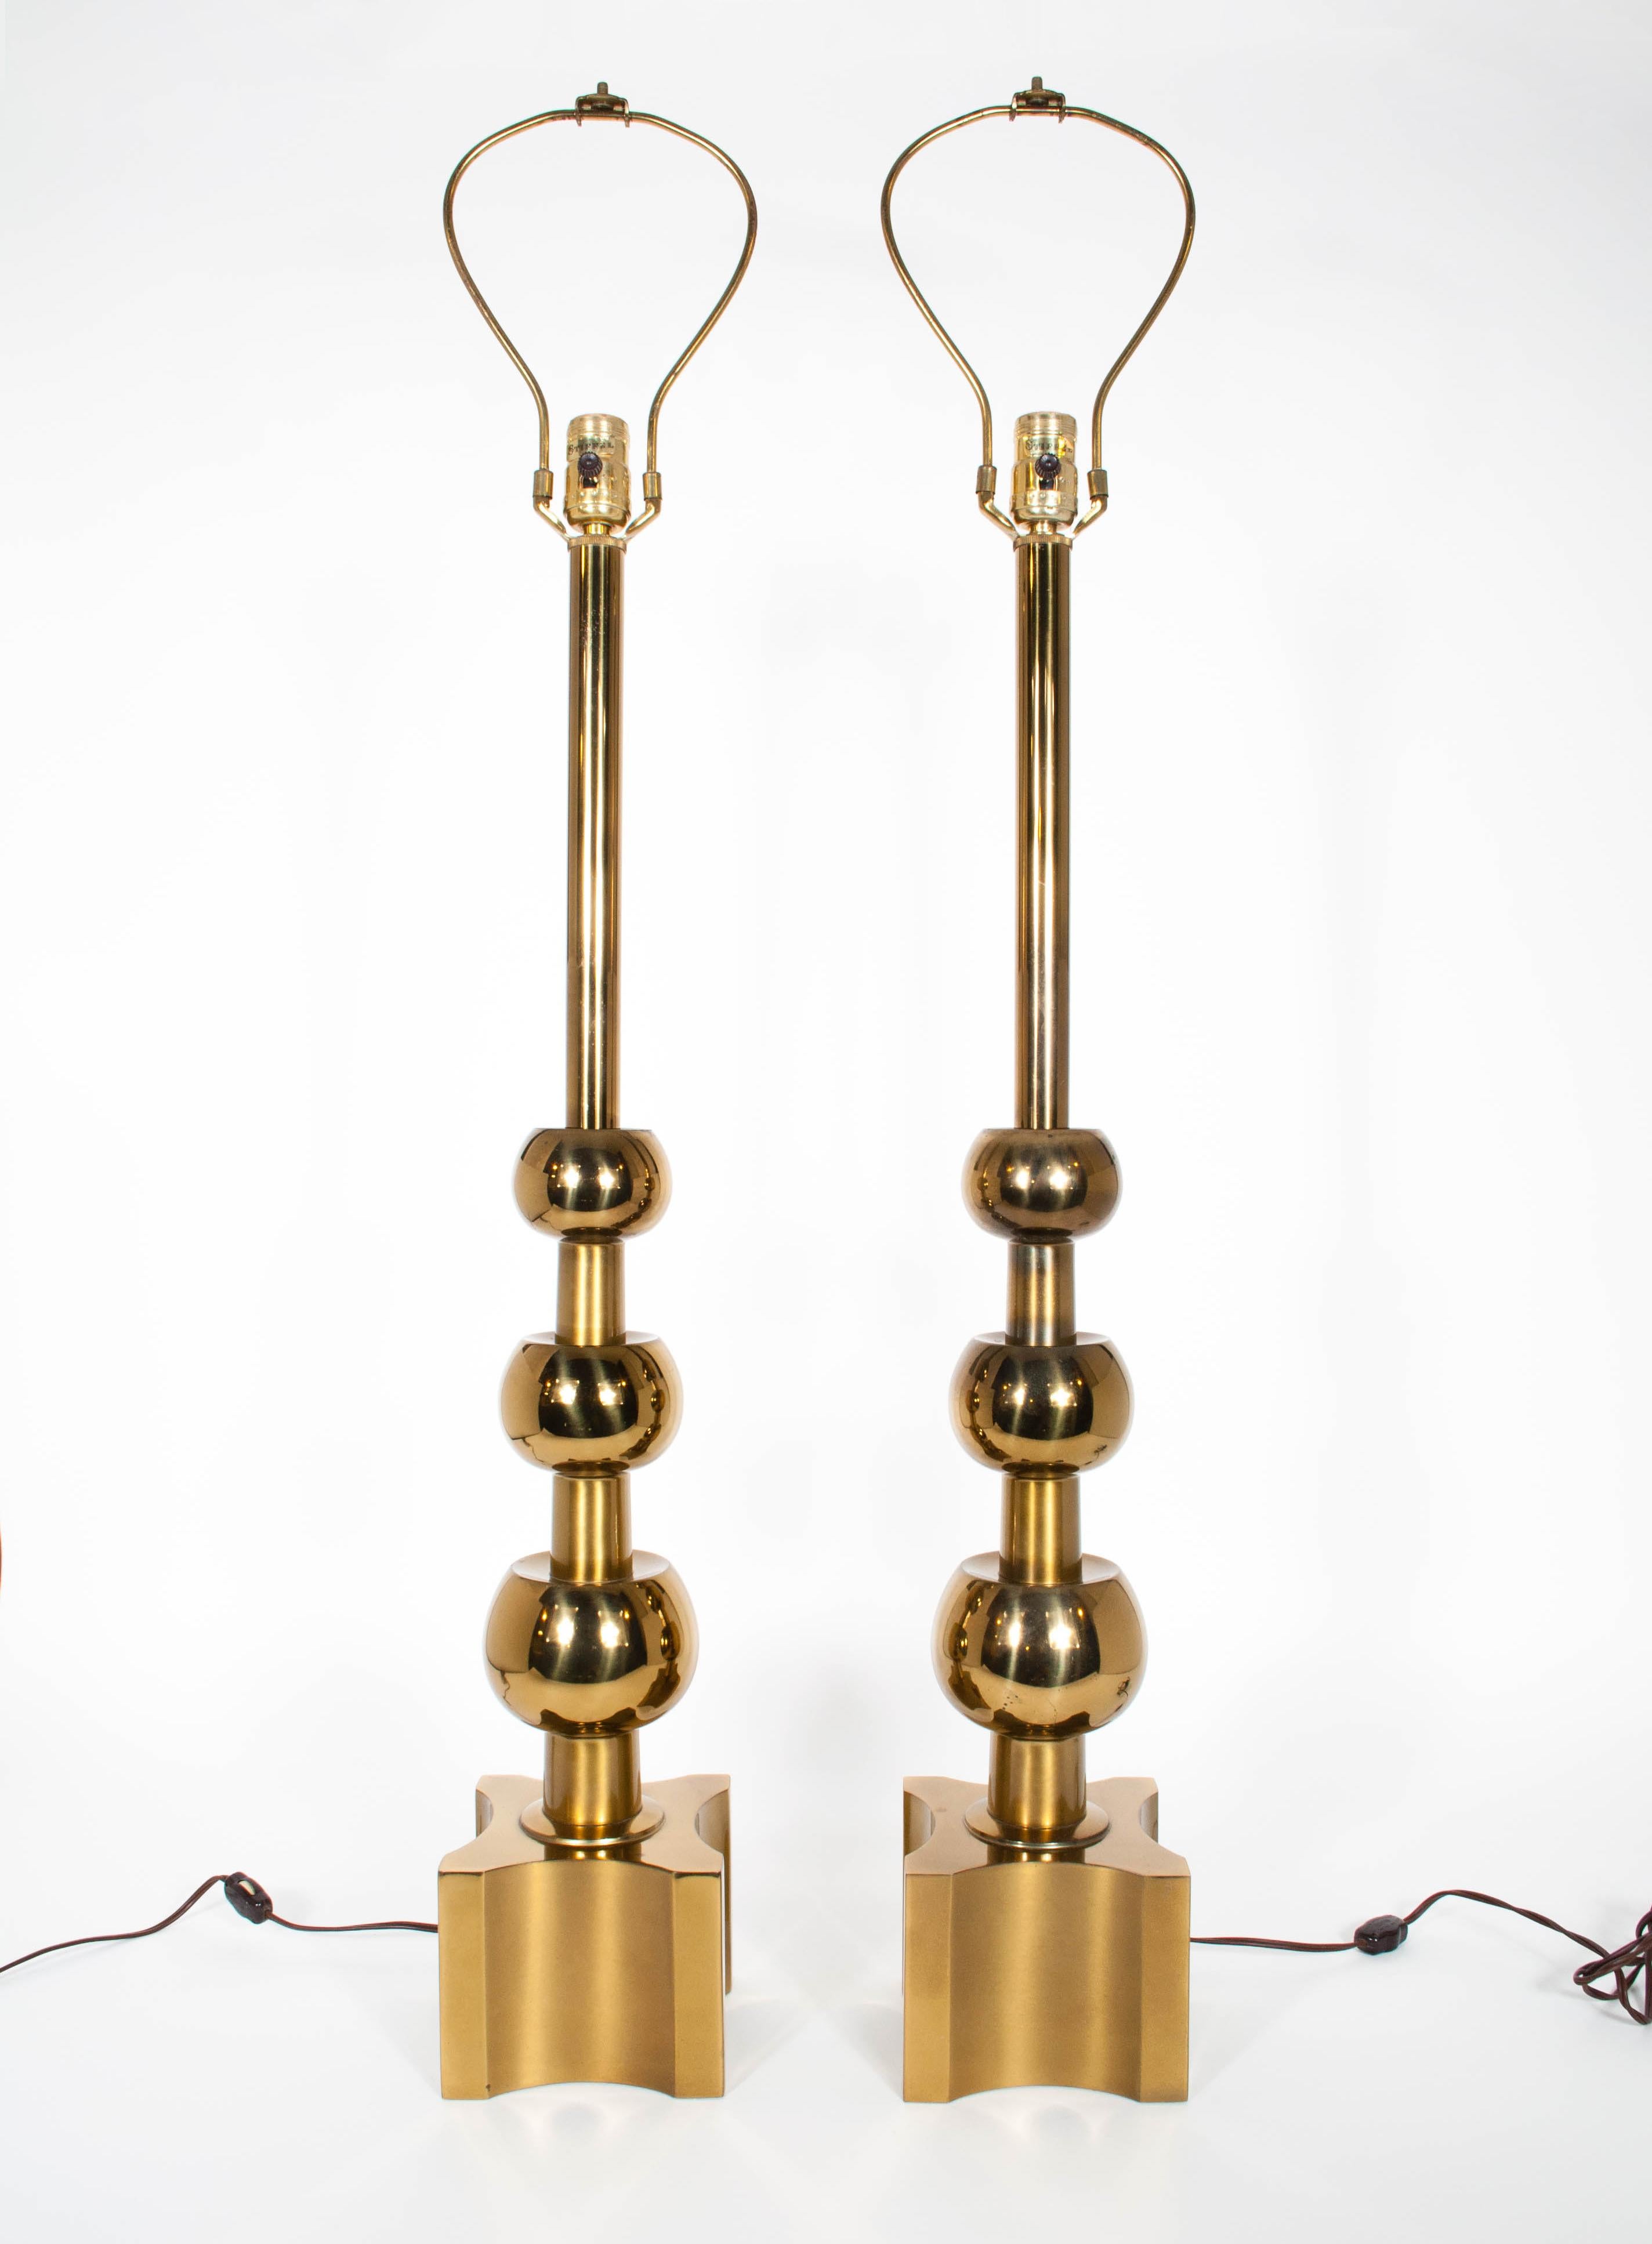 Iconic pair of midcentury brass lamps by Tommi Parzinger for Stiffel Lamp Company. The glamorous and grand lamps feature a stepped three-ball design and an X-block base. Original paper labels are present on the socket of each lamp. Monumental in